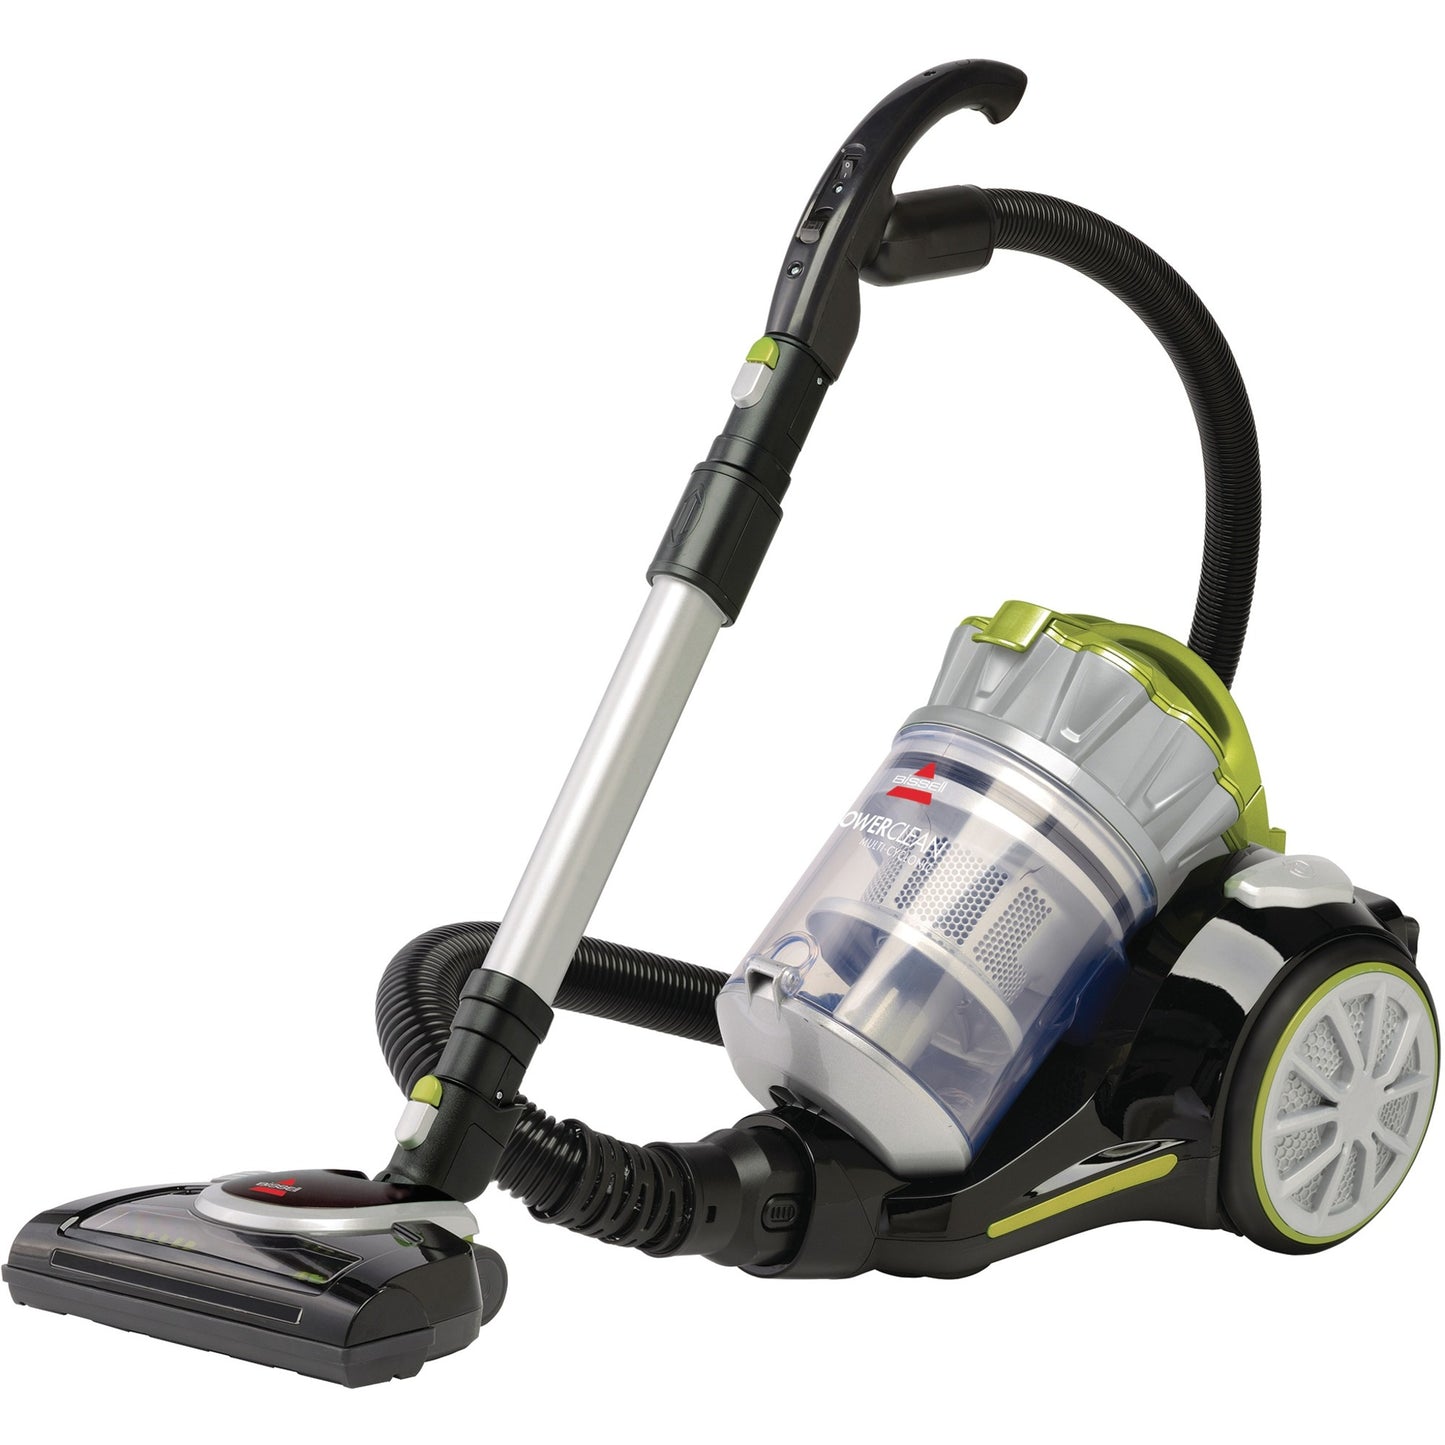 BISSELL PowerClean Multi-Cyclonic Canister Vacuum w/ Motorized Power Foot 1654C